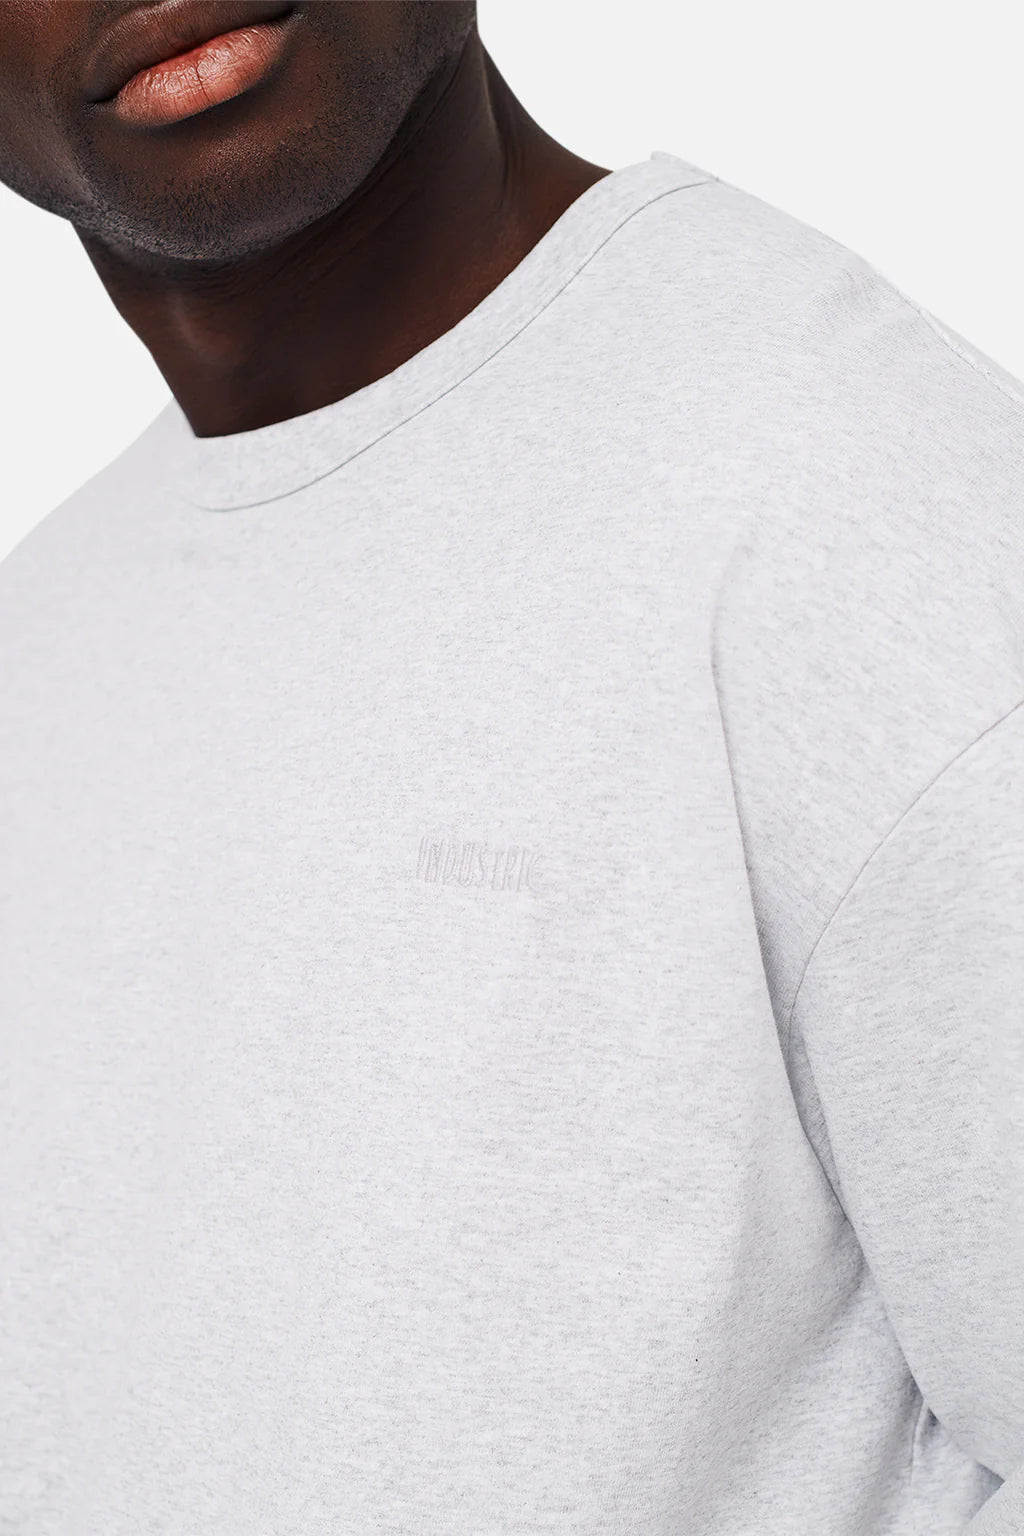 INDUSTRIE - THE DEL SUR L/S TEE - NEW MARLE GREY